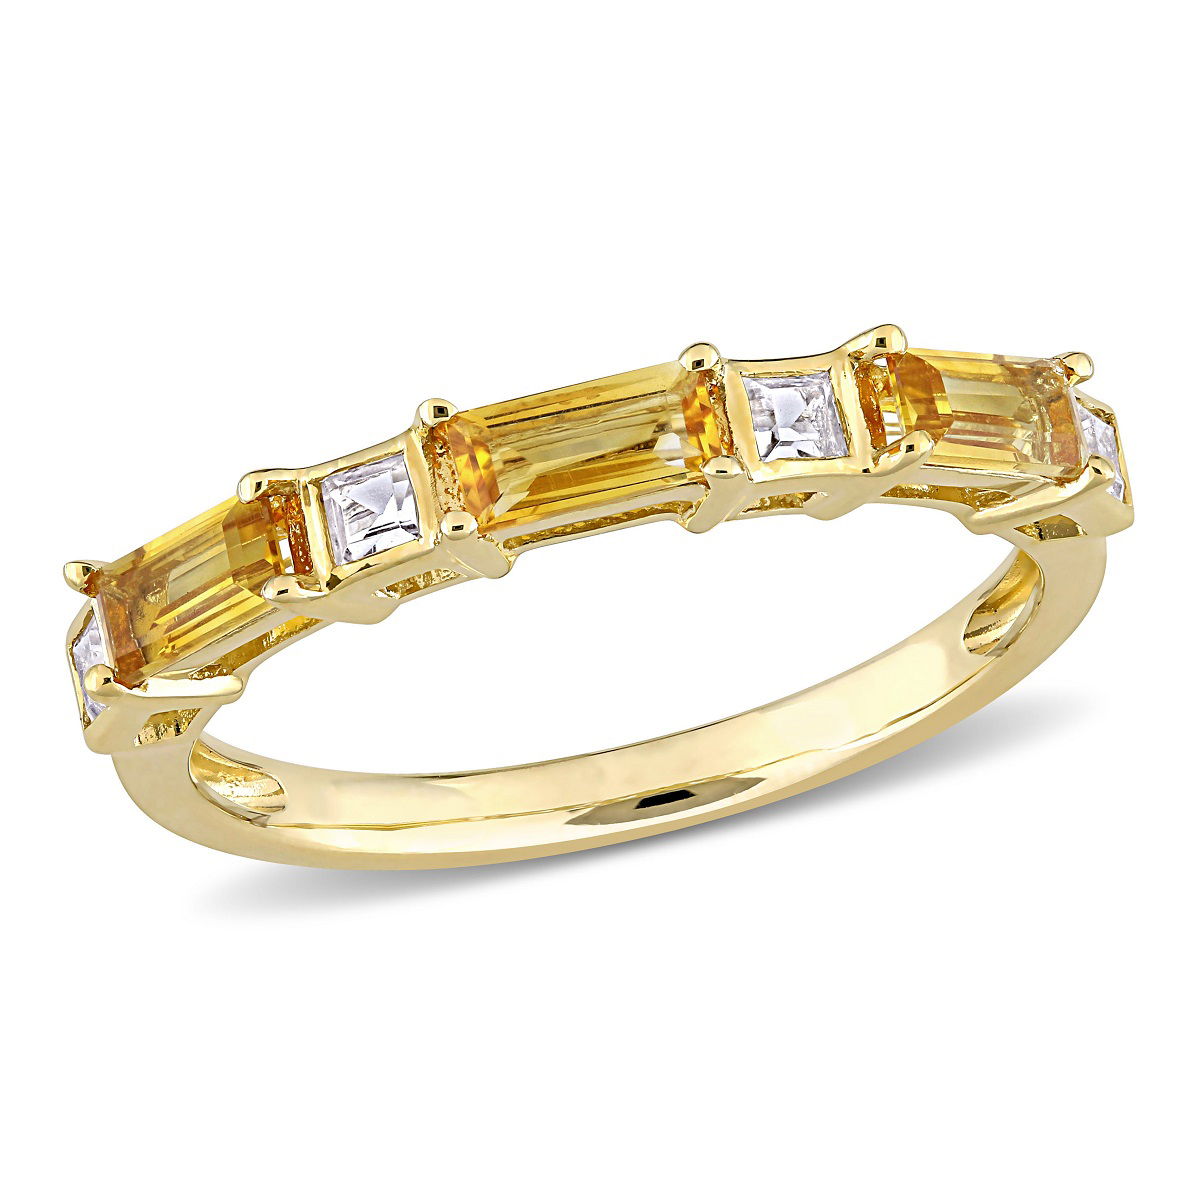 Gemstone Classics(tm) 10kt. Yellow Gold & White Topaz Stackable Ring